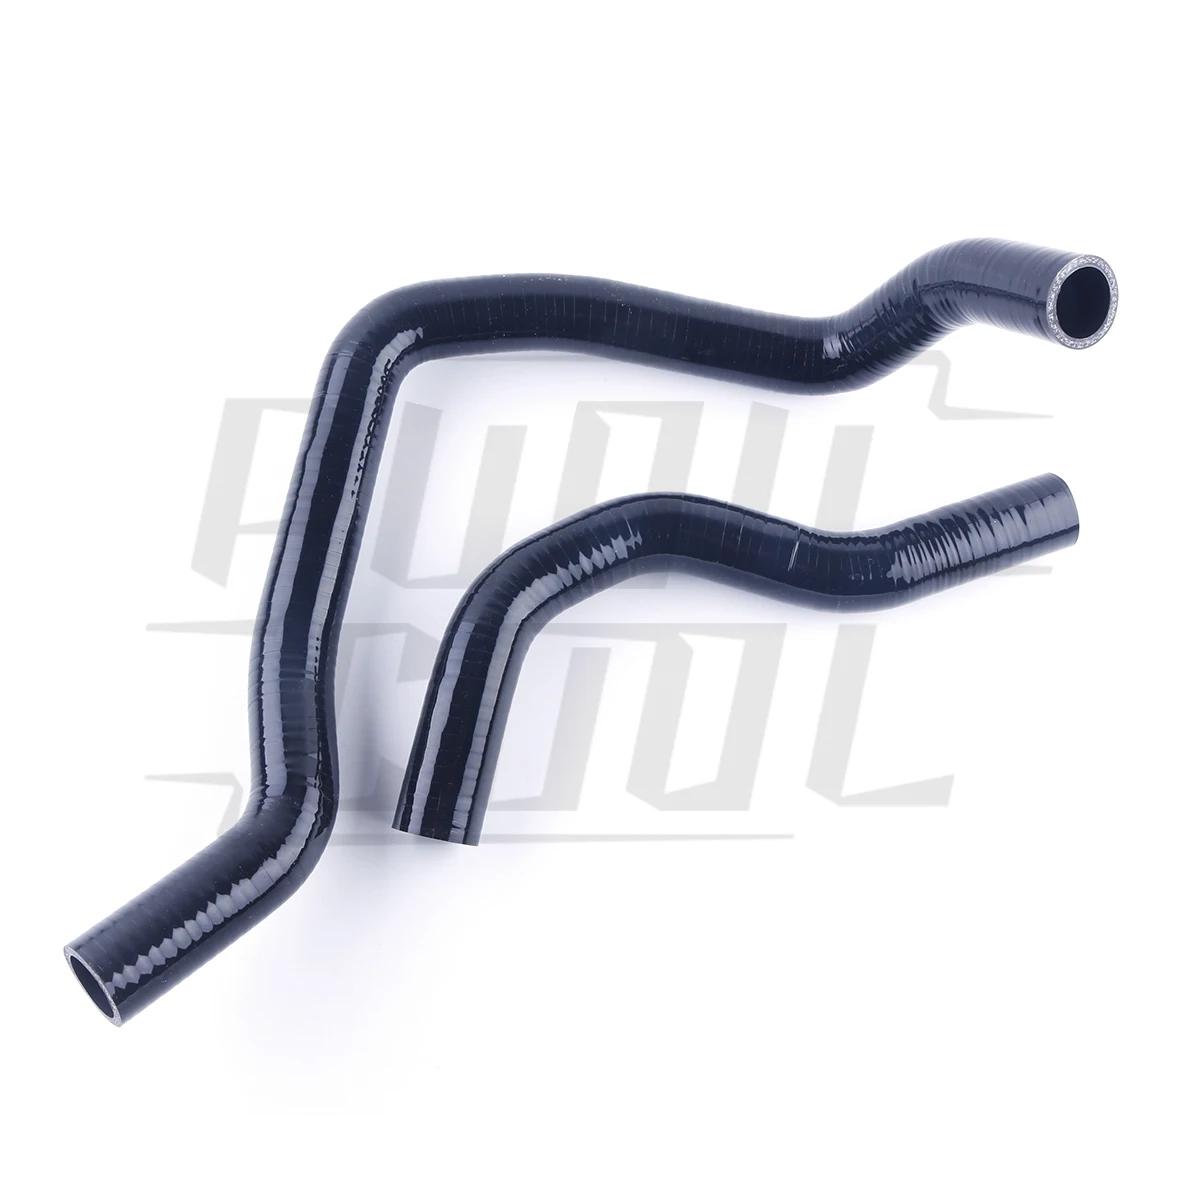 

For 1988-1991 Honda CRX 88 91 Civic SiR VT EE8 EE9 EF8 EF9 B16A 1989 1990 Silicone Radiator Hoses Kit Tubes Piping 2Pcs 10 Color